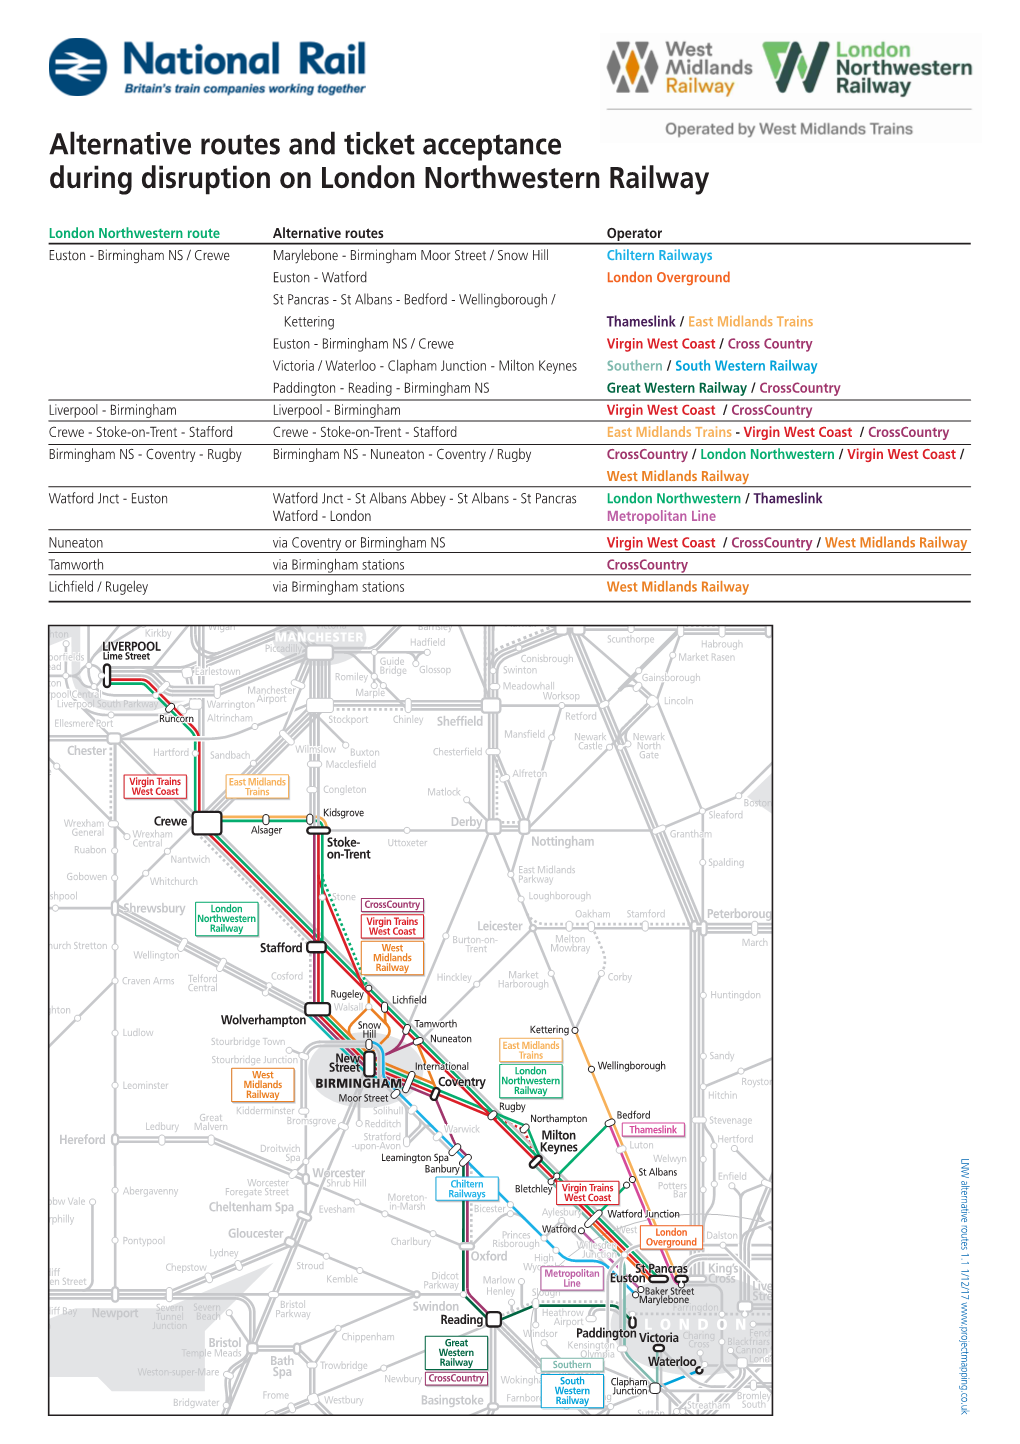 Alternative Routes and Ticket Acceptance